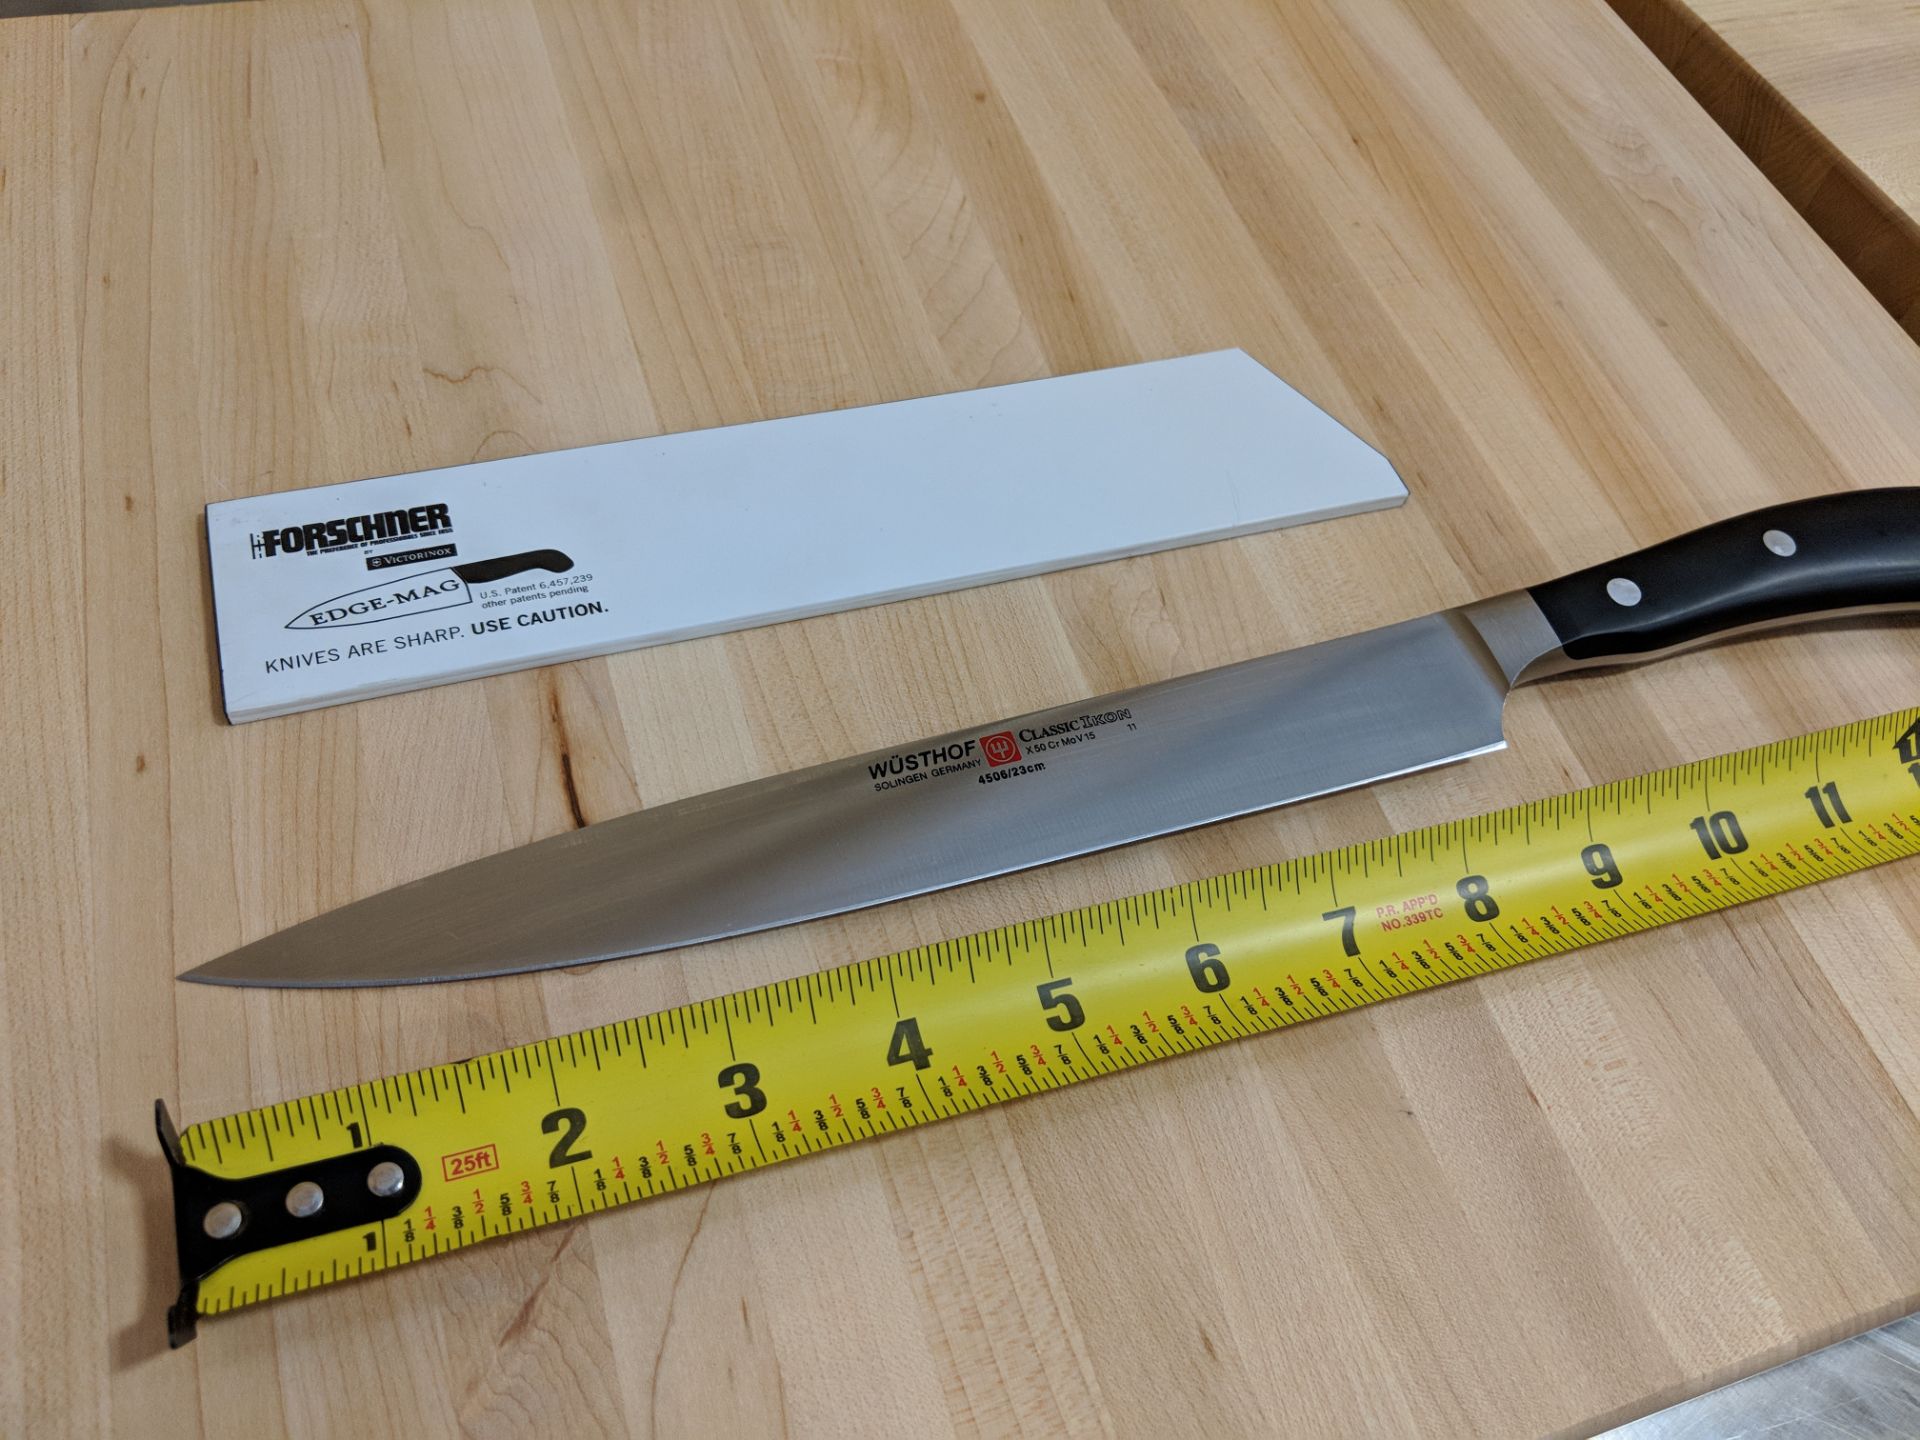 Wusthof 9" Classic Ikon Carving Knife with Guard - 4506-23